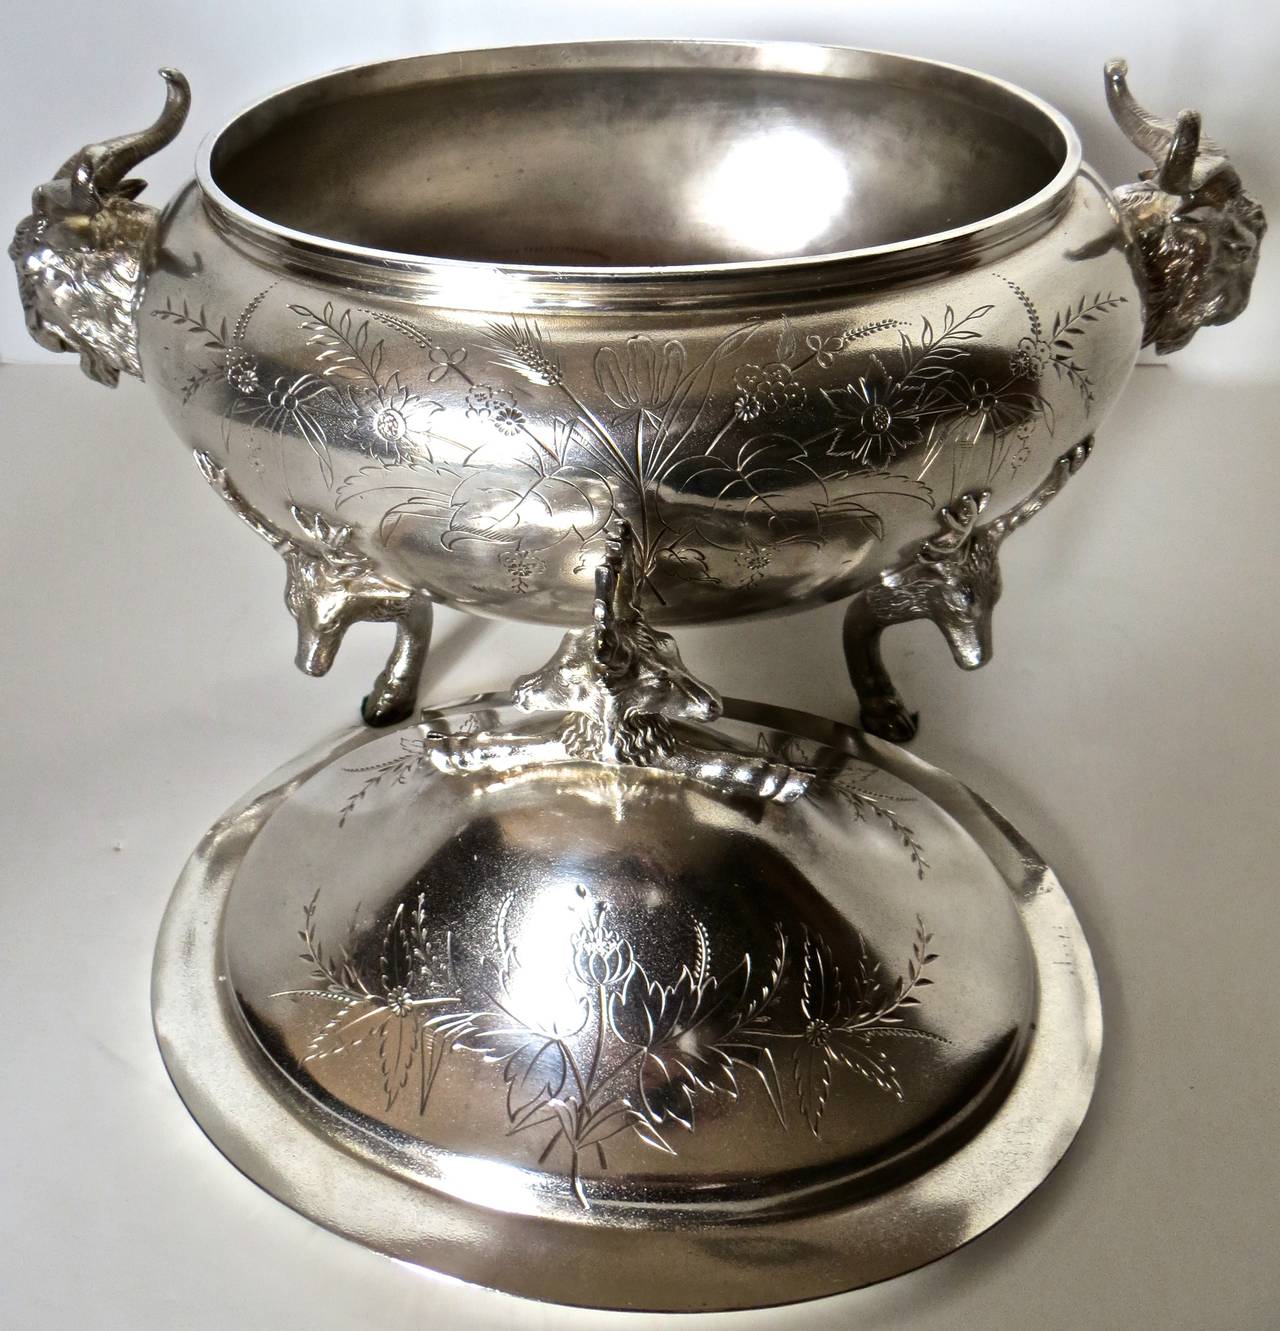 Silver Plated Covered Tureen with Deer and Ram Motif, circa 1885, Meriden In Good Condition For Sale In Incline Village, NV